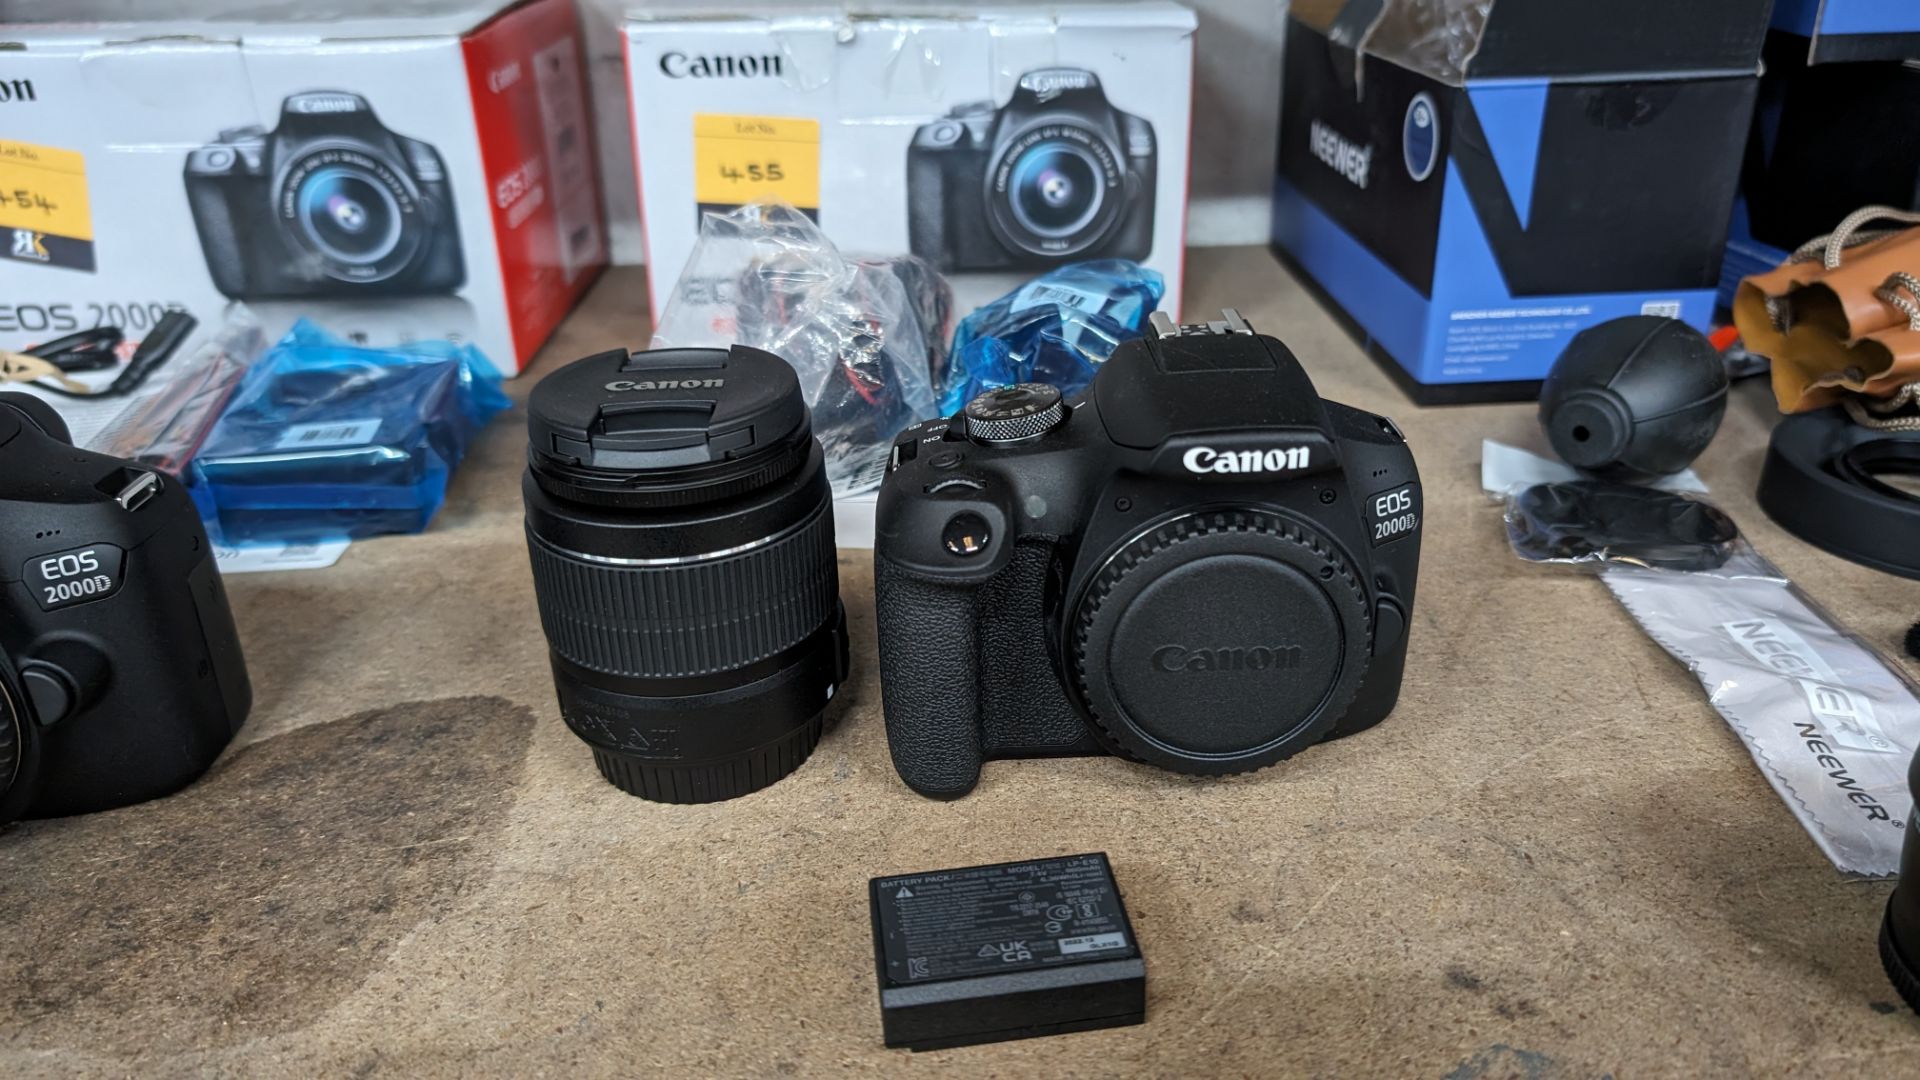 Canon EOS 2000D camera with EFS 18-55mm lens plus battery, charger, strap and more - Image 3 of 15